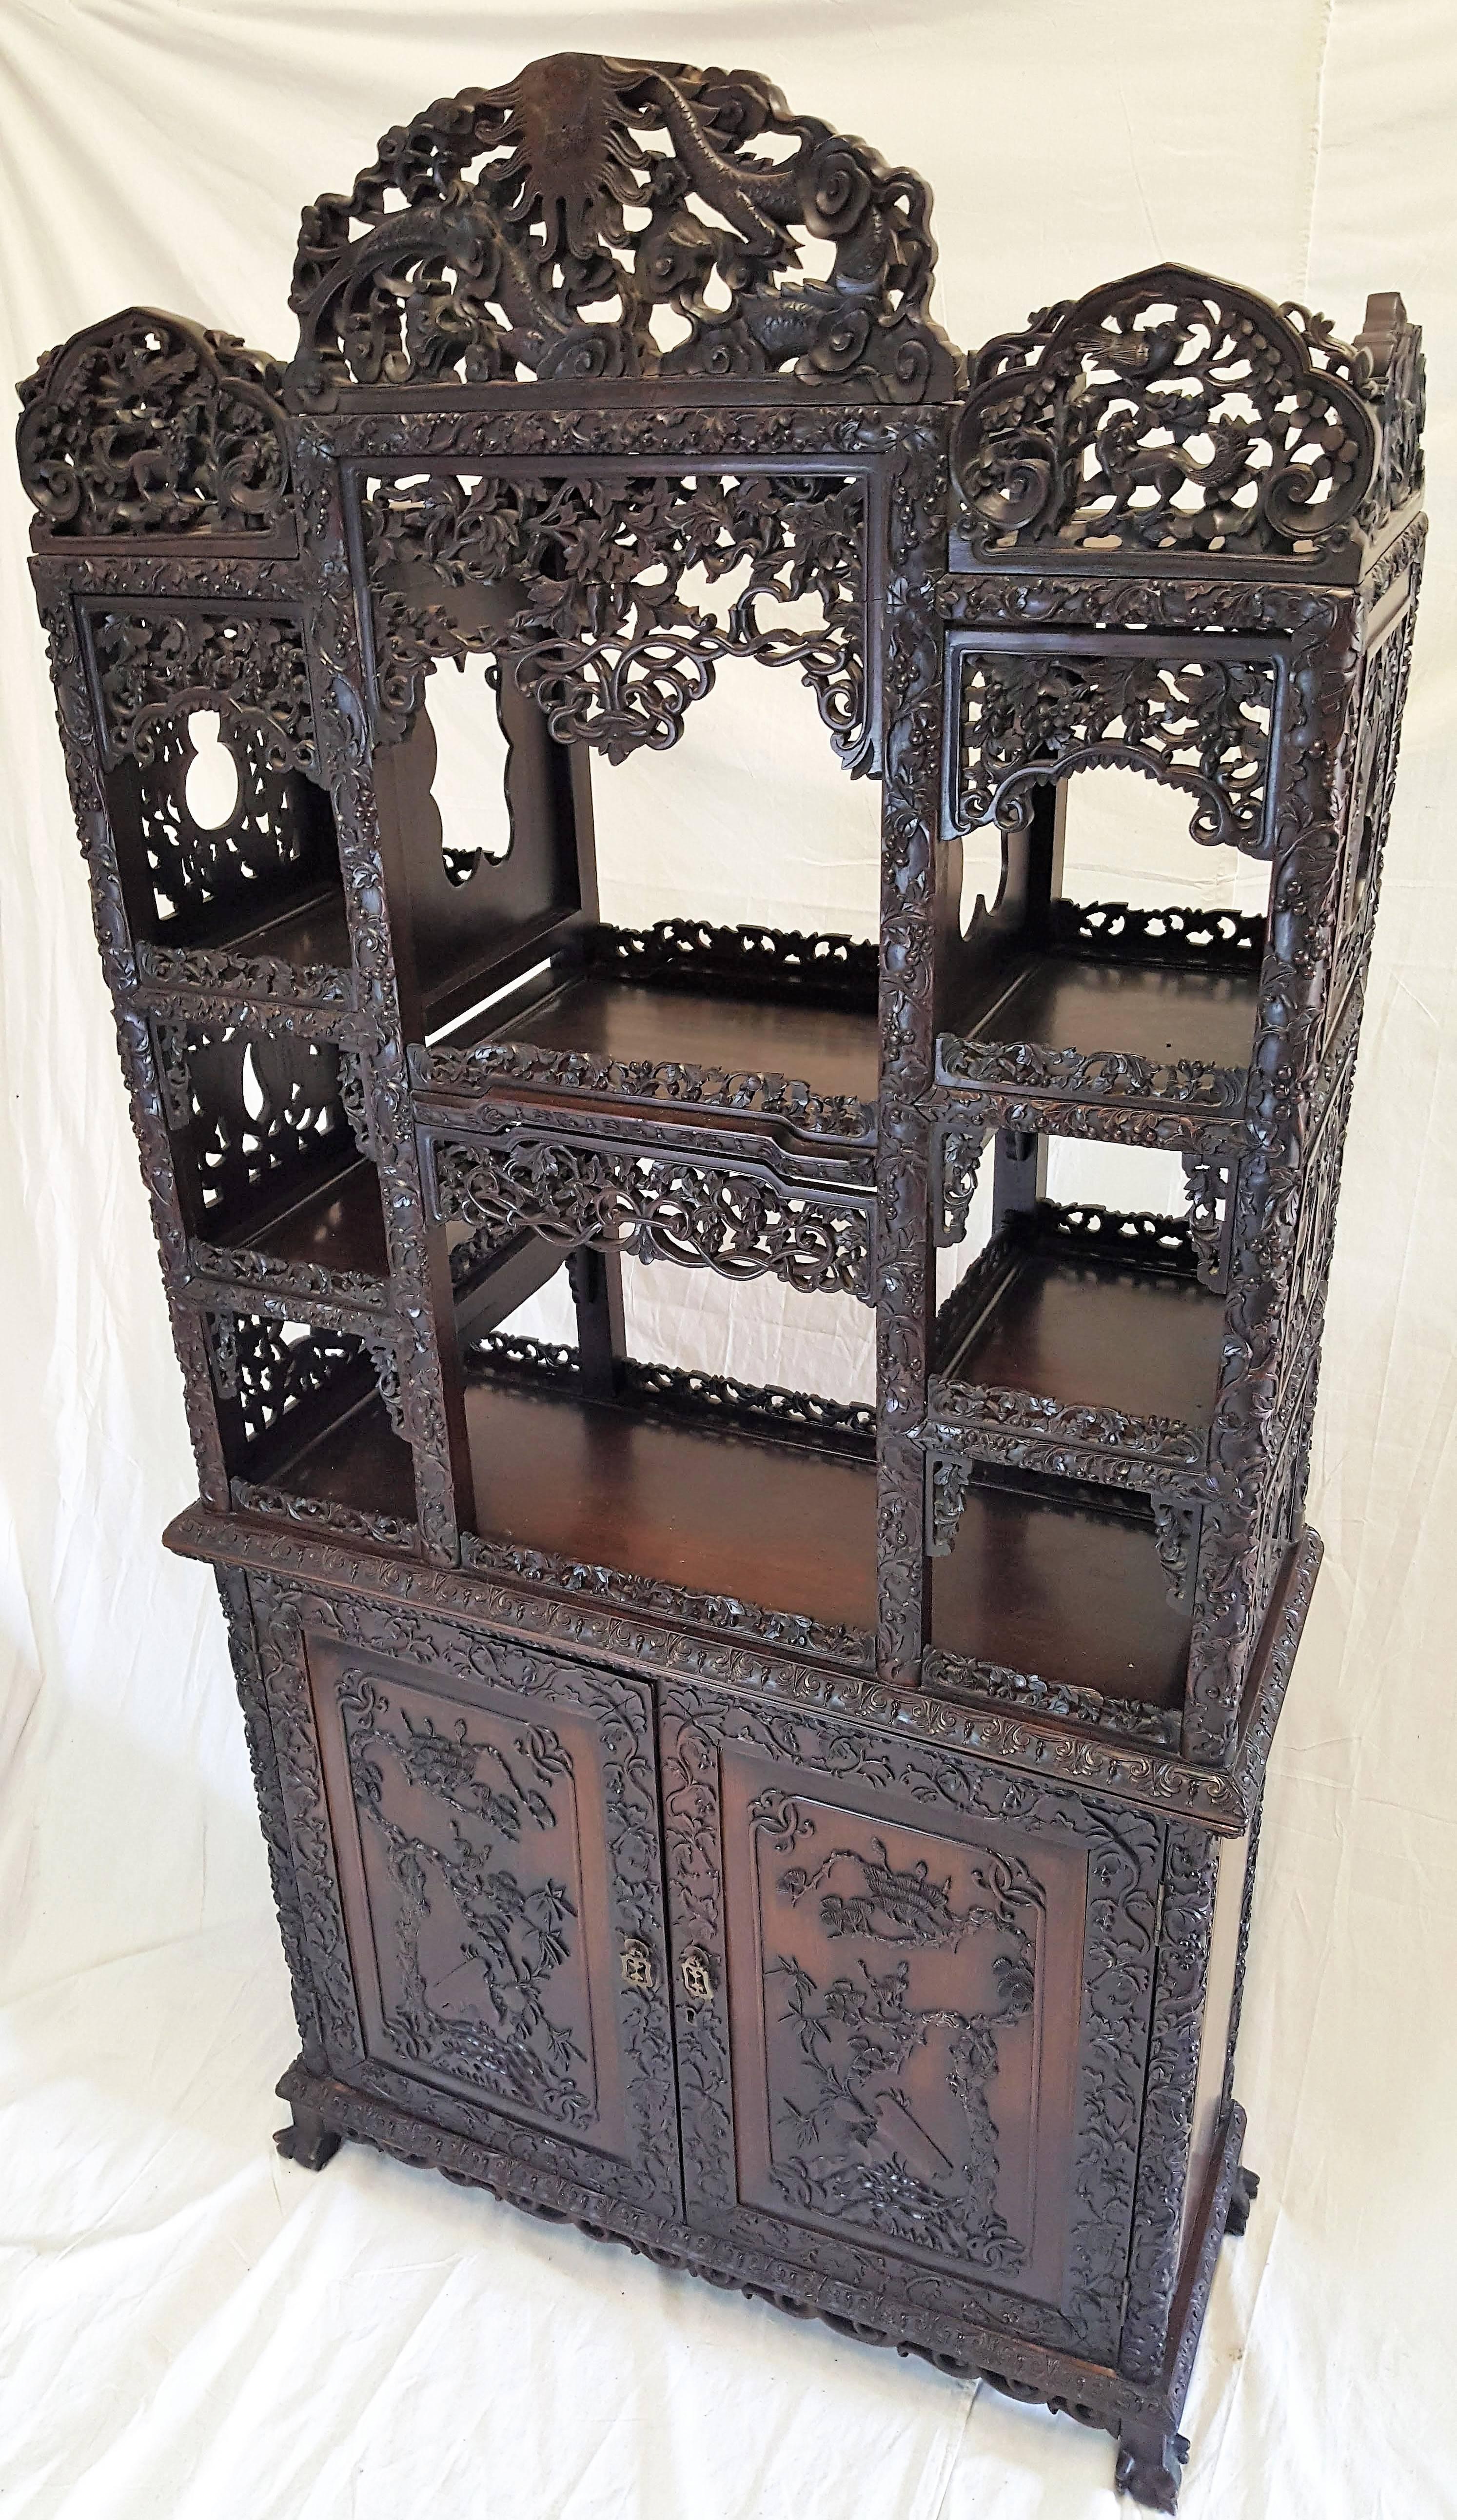 Expressing long life and happiness this beautifully highly reticulated Hong Mu curio cabinet is of the Qing dynasty. Birds, animals, berries, vines and the never ending coil are beautifully carved into this dark hong mu or rosewood cabinet.